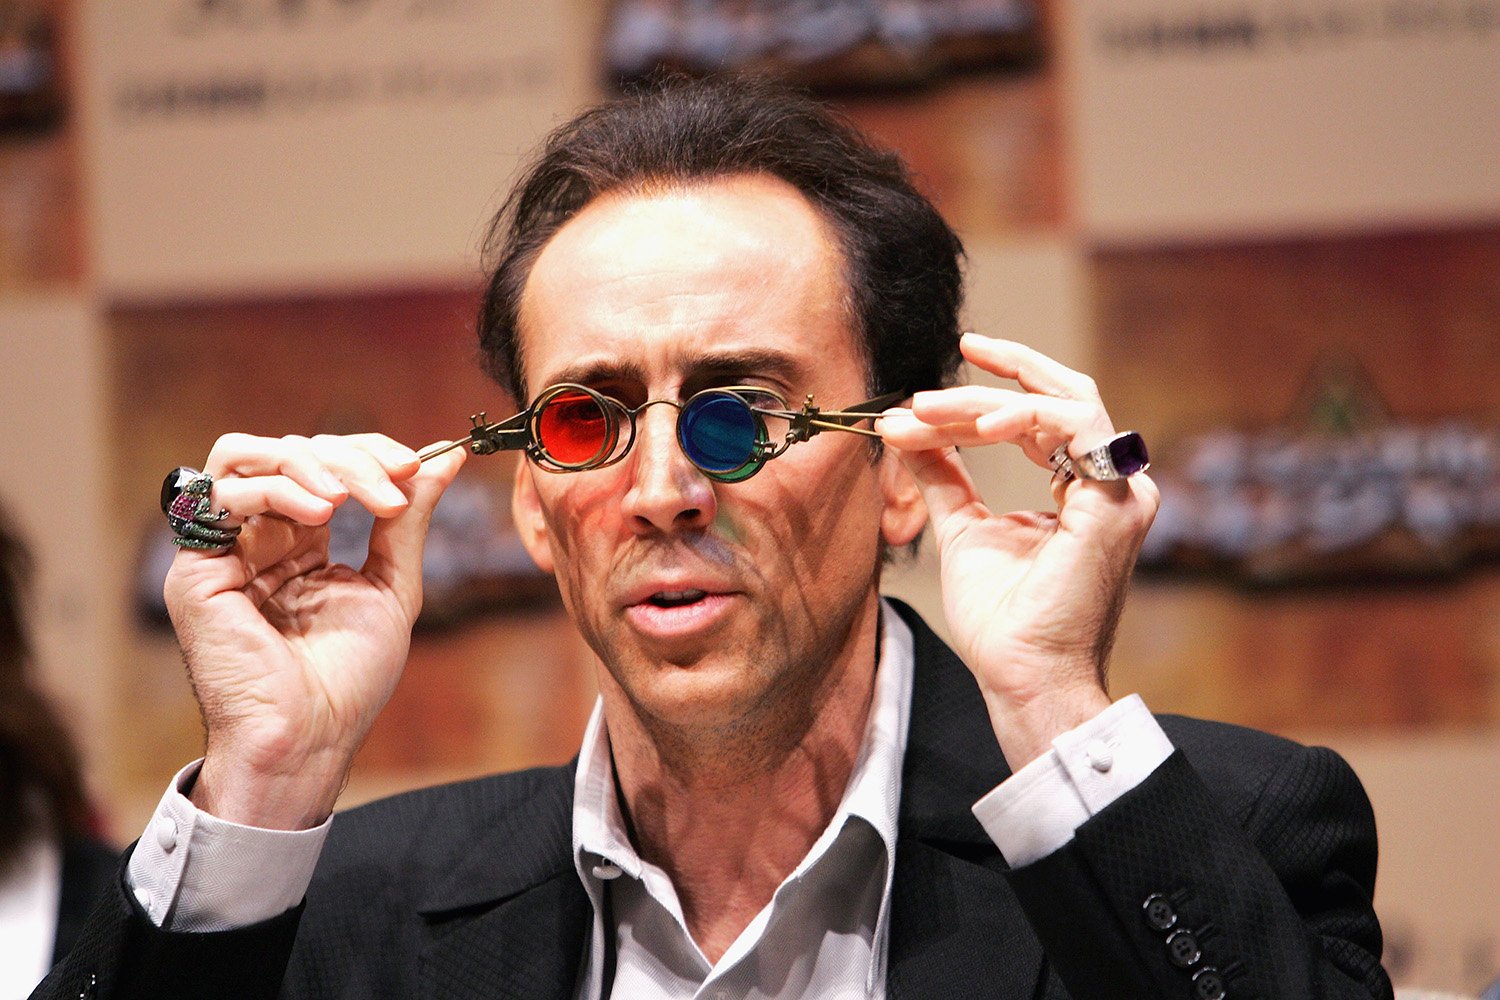 National Treasure 3 news: Nicolas Cage holds up Benjamin Franklin's colorful glasses from National Treasure at a 2004 press conference in Tokyo.